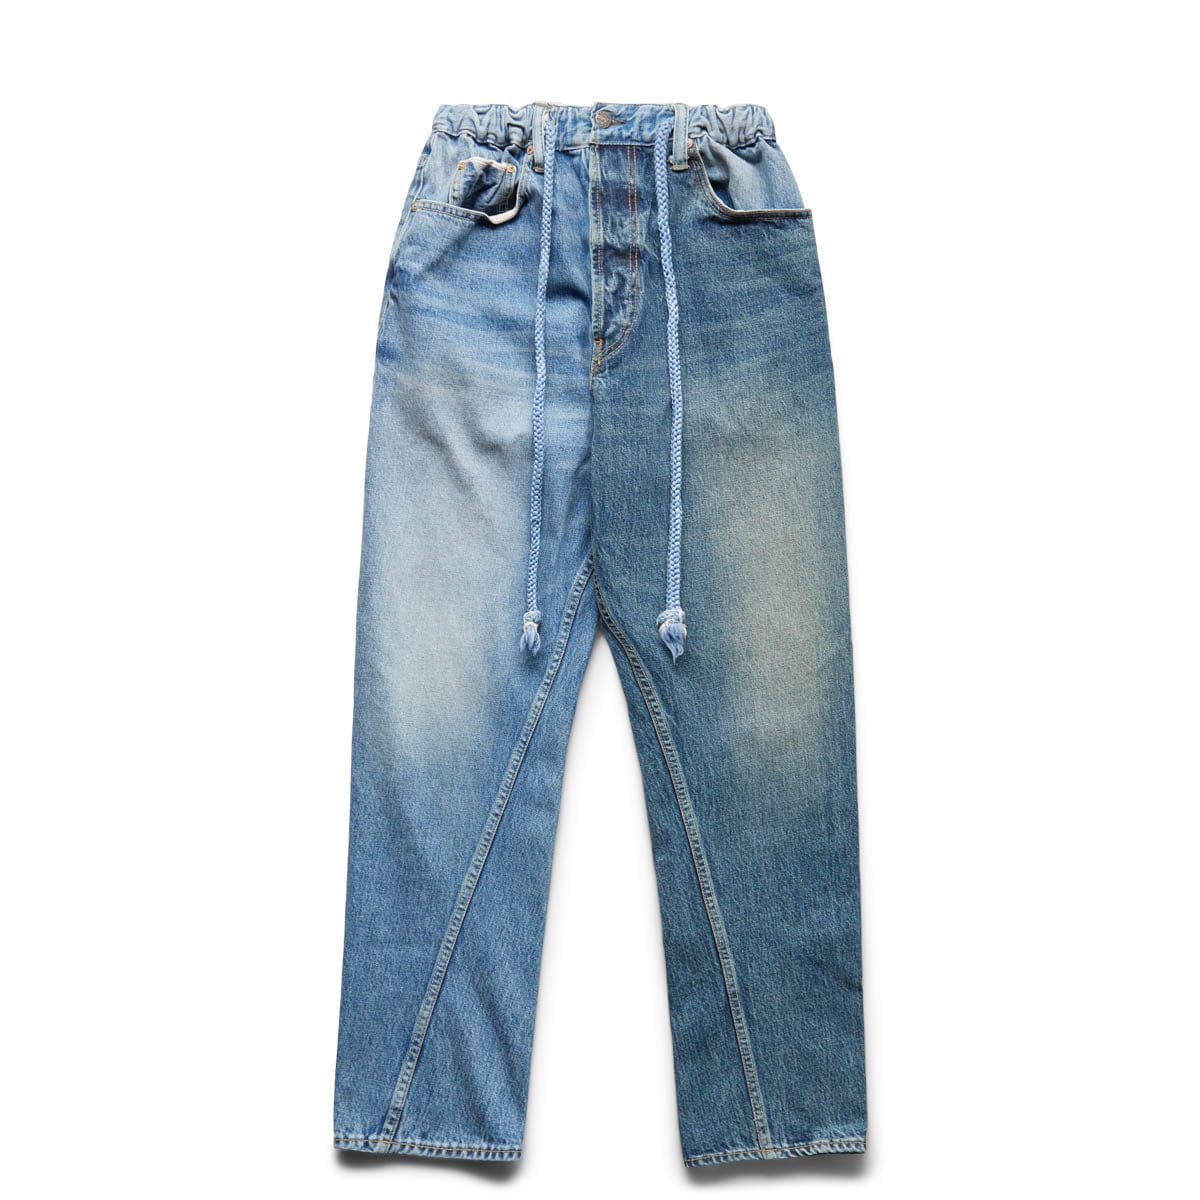 Dr. Collectors Bottoms P60 DR. LEEVI'S 3 YEAR WASH